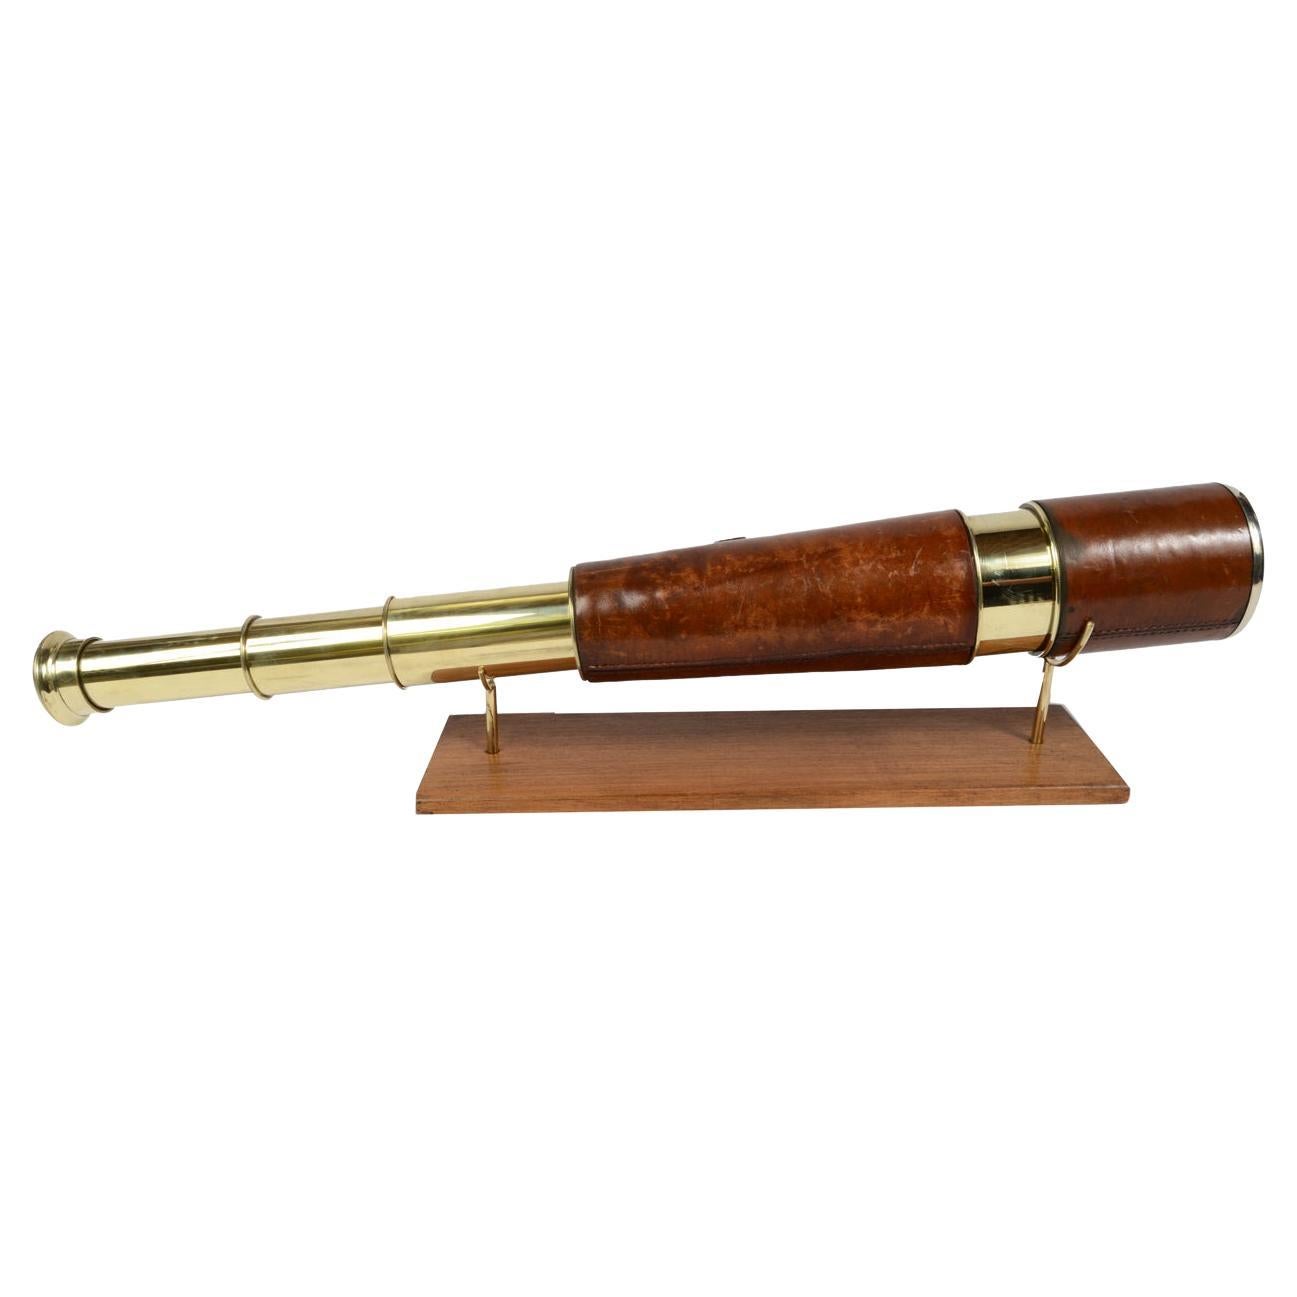 Antique Nautical Telescope, Brass and Leather, Early 1900s